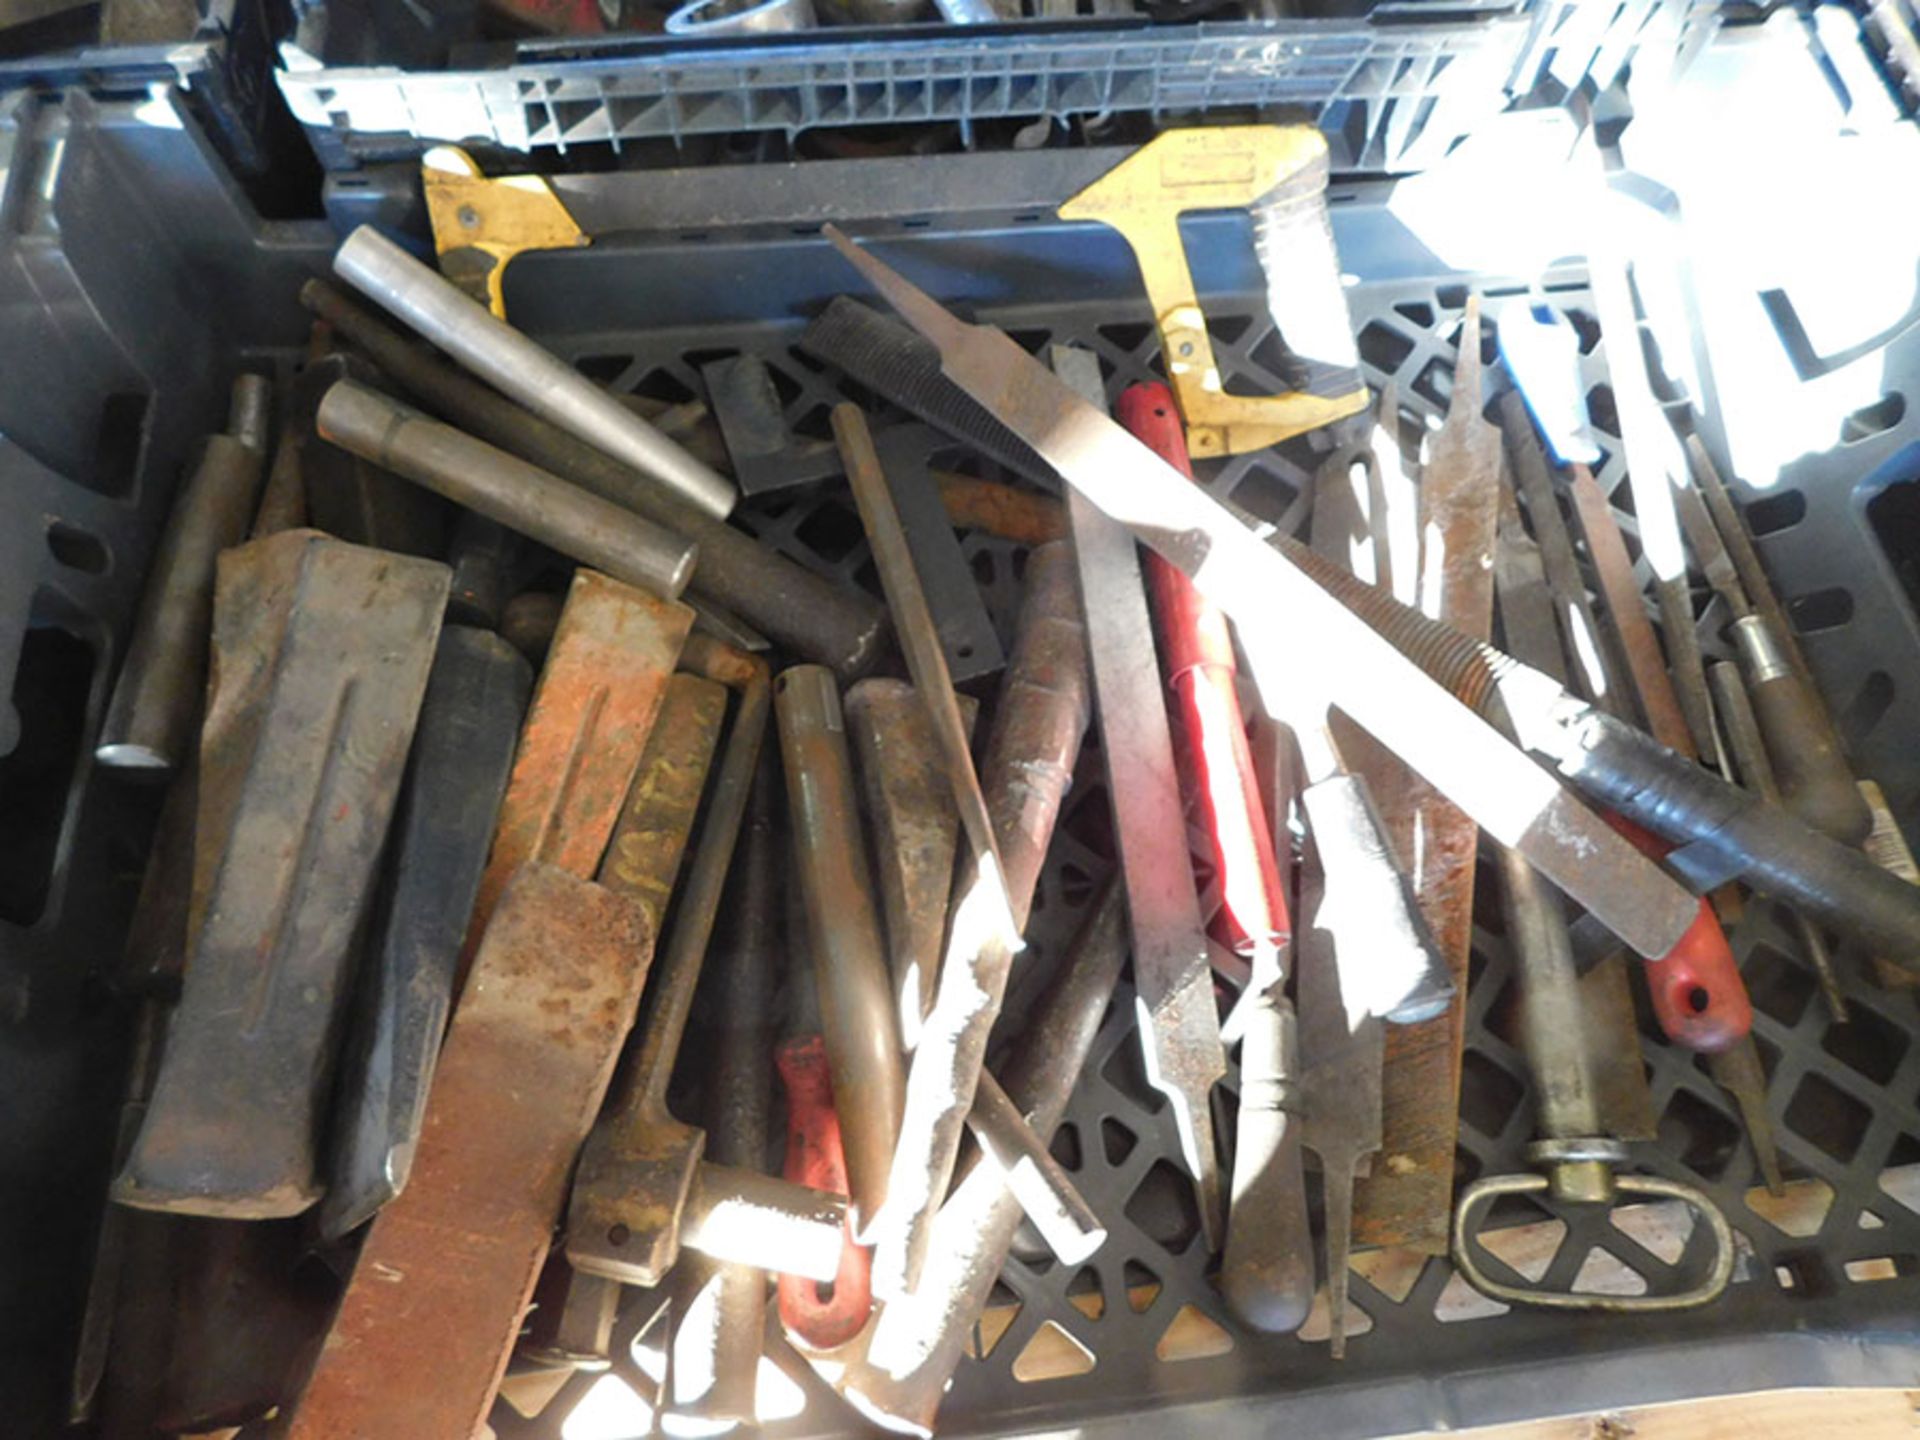 LOT OF STEEL BRUSHES, FILES, AND STEEL WEDGES - Image 2 of 3